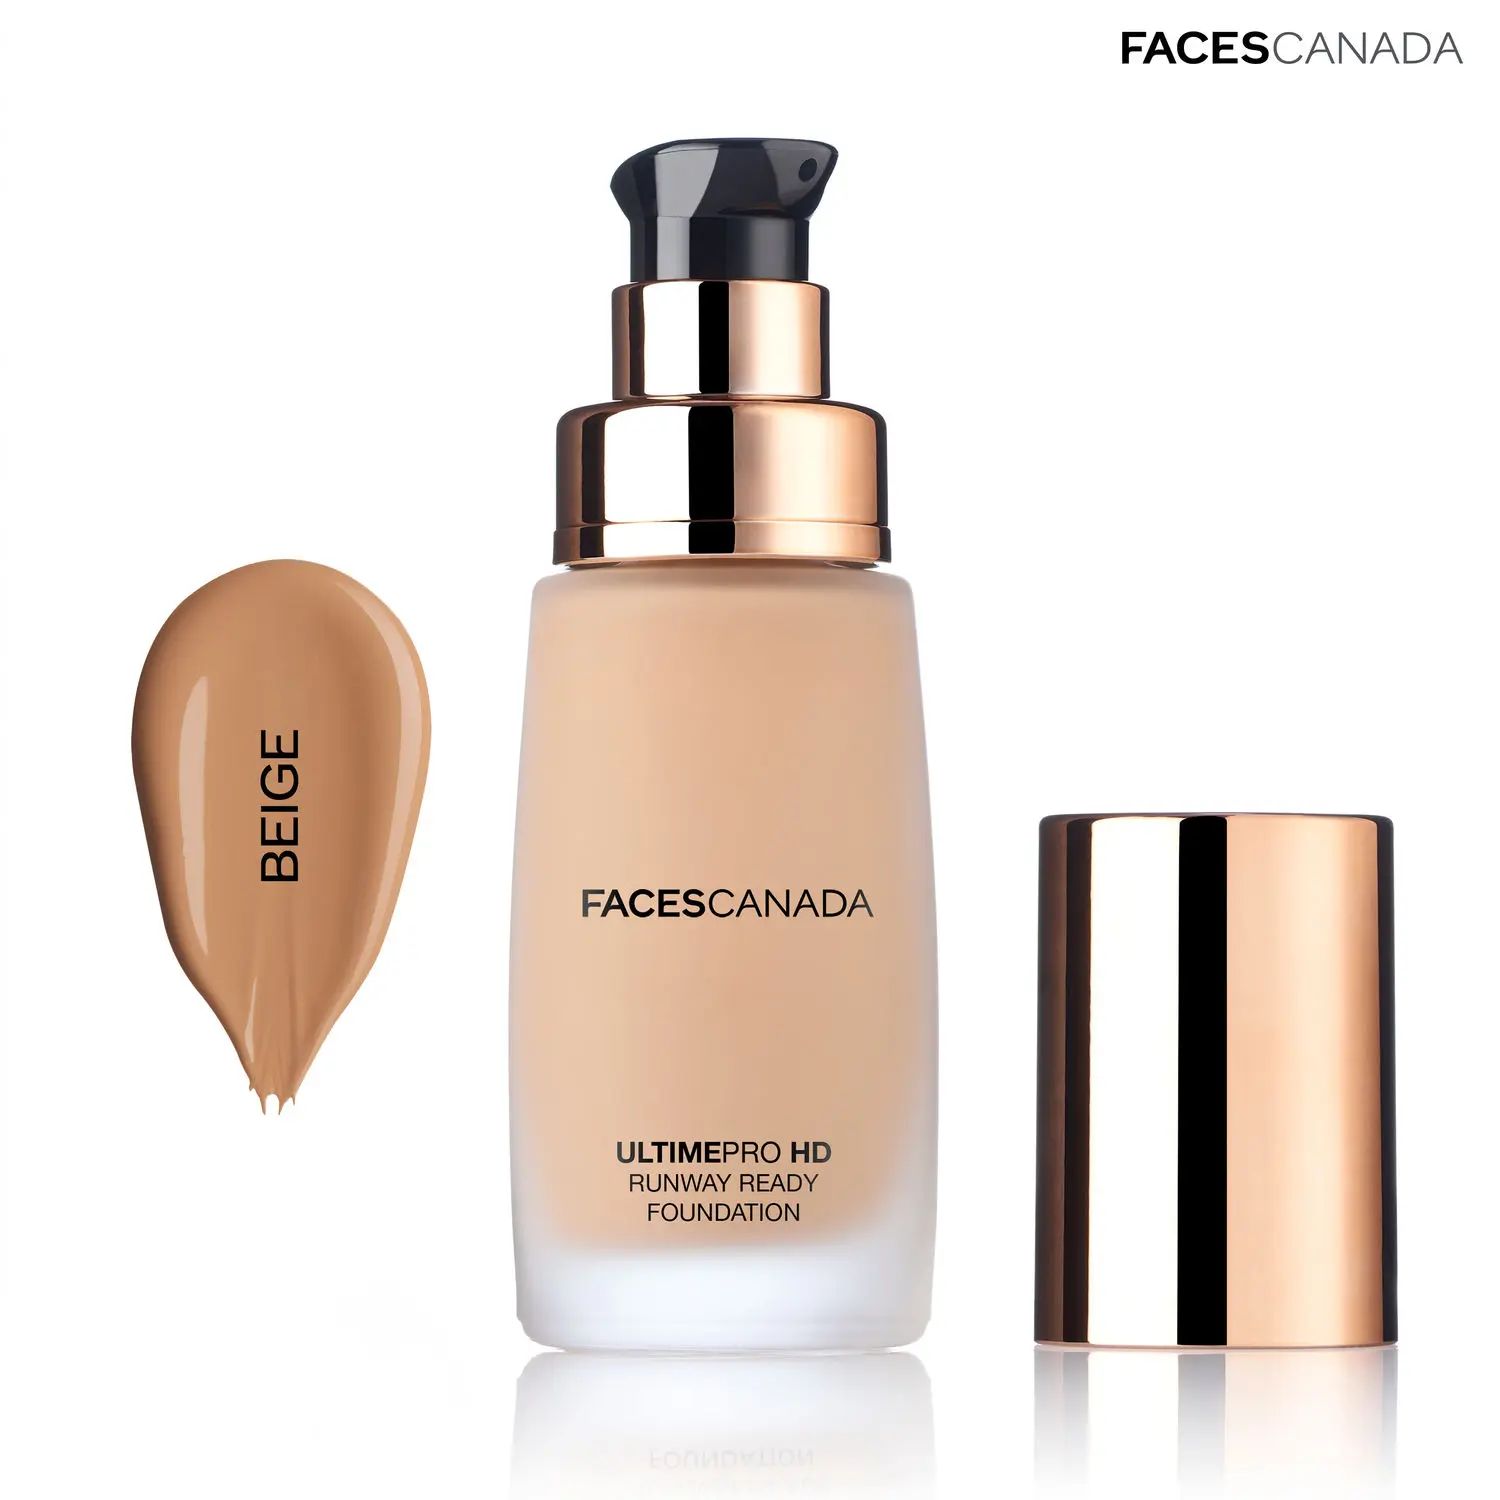 Faces Canada Ultime Pro HD Runway Ready Foundation - Beige 03 (30 ml)